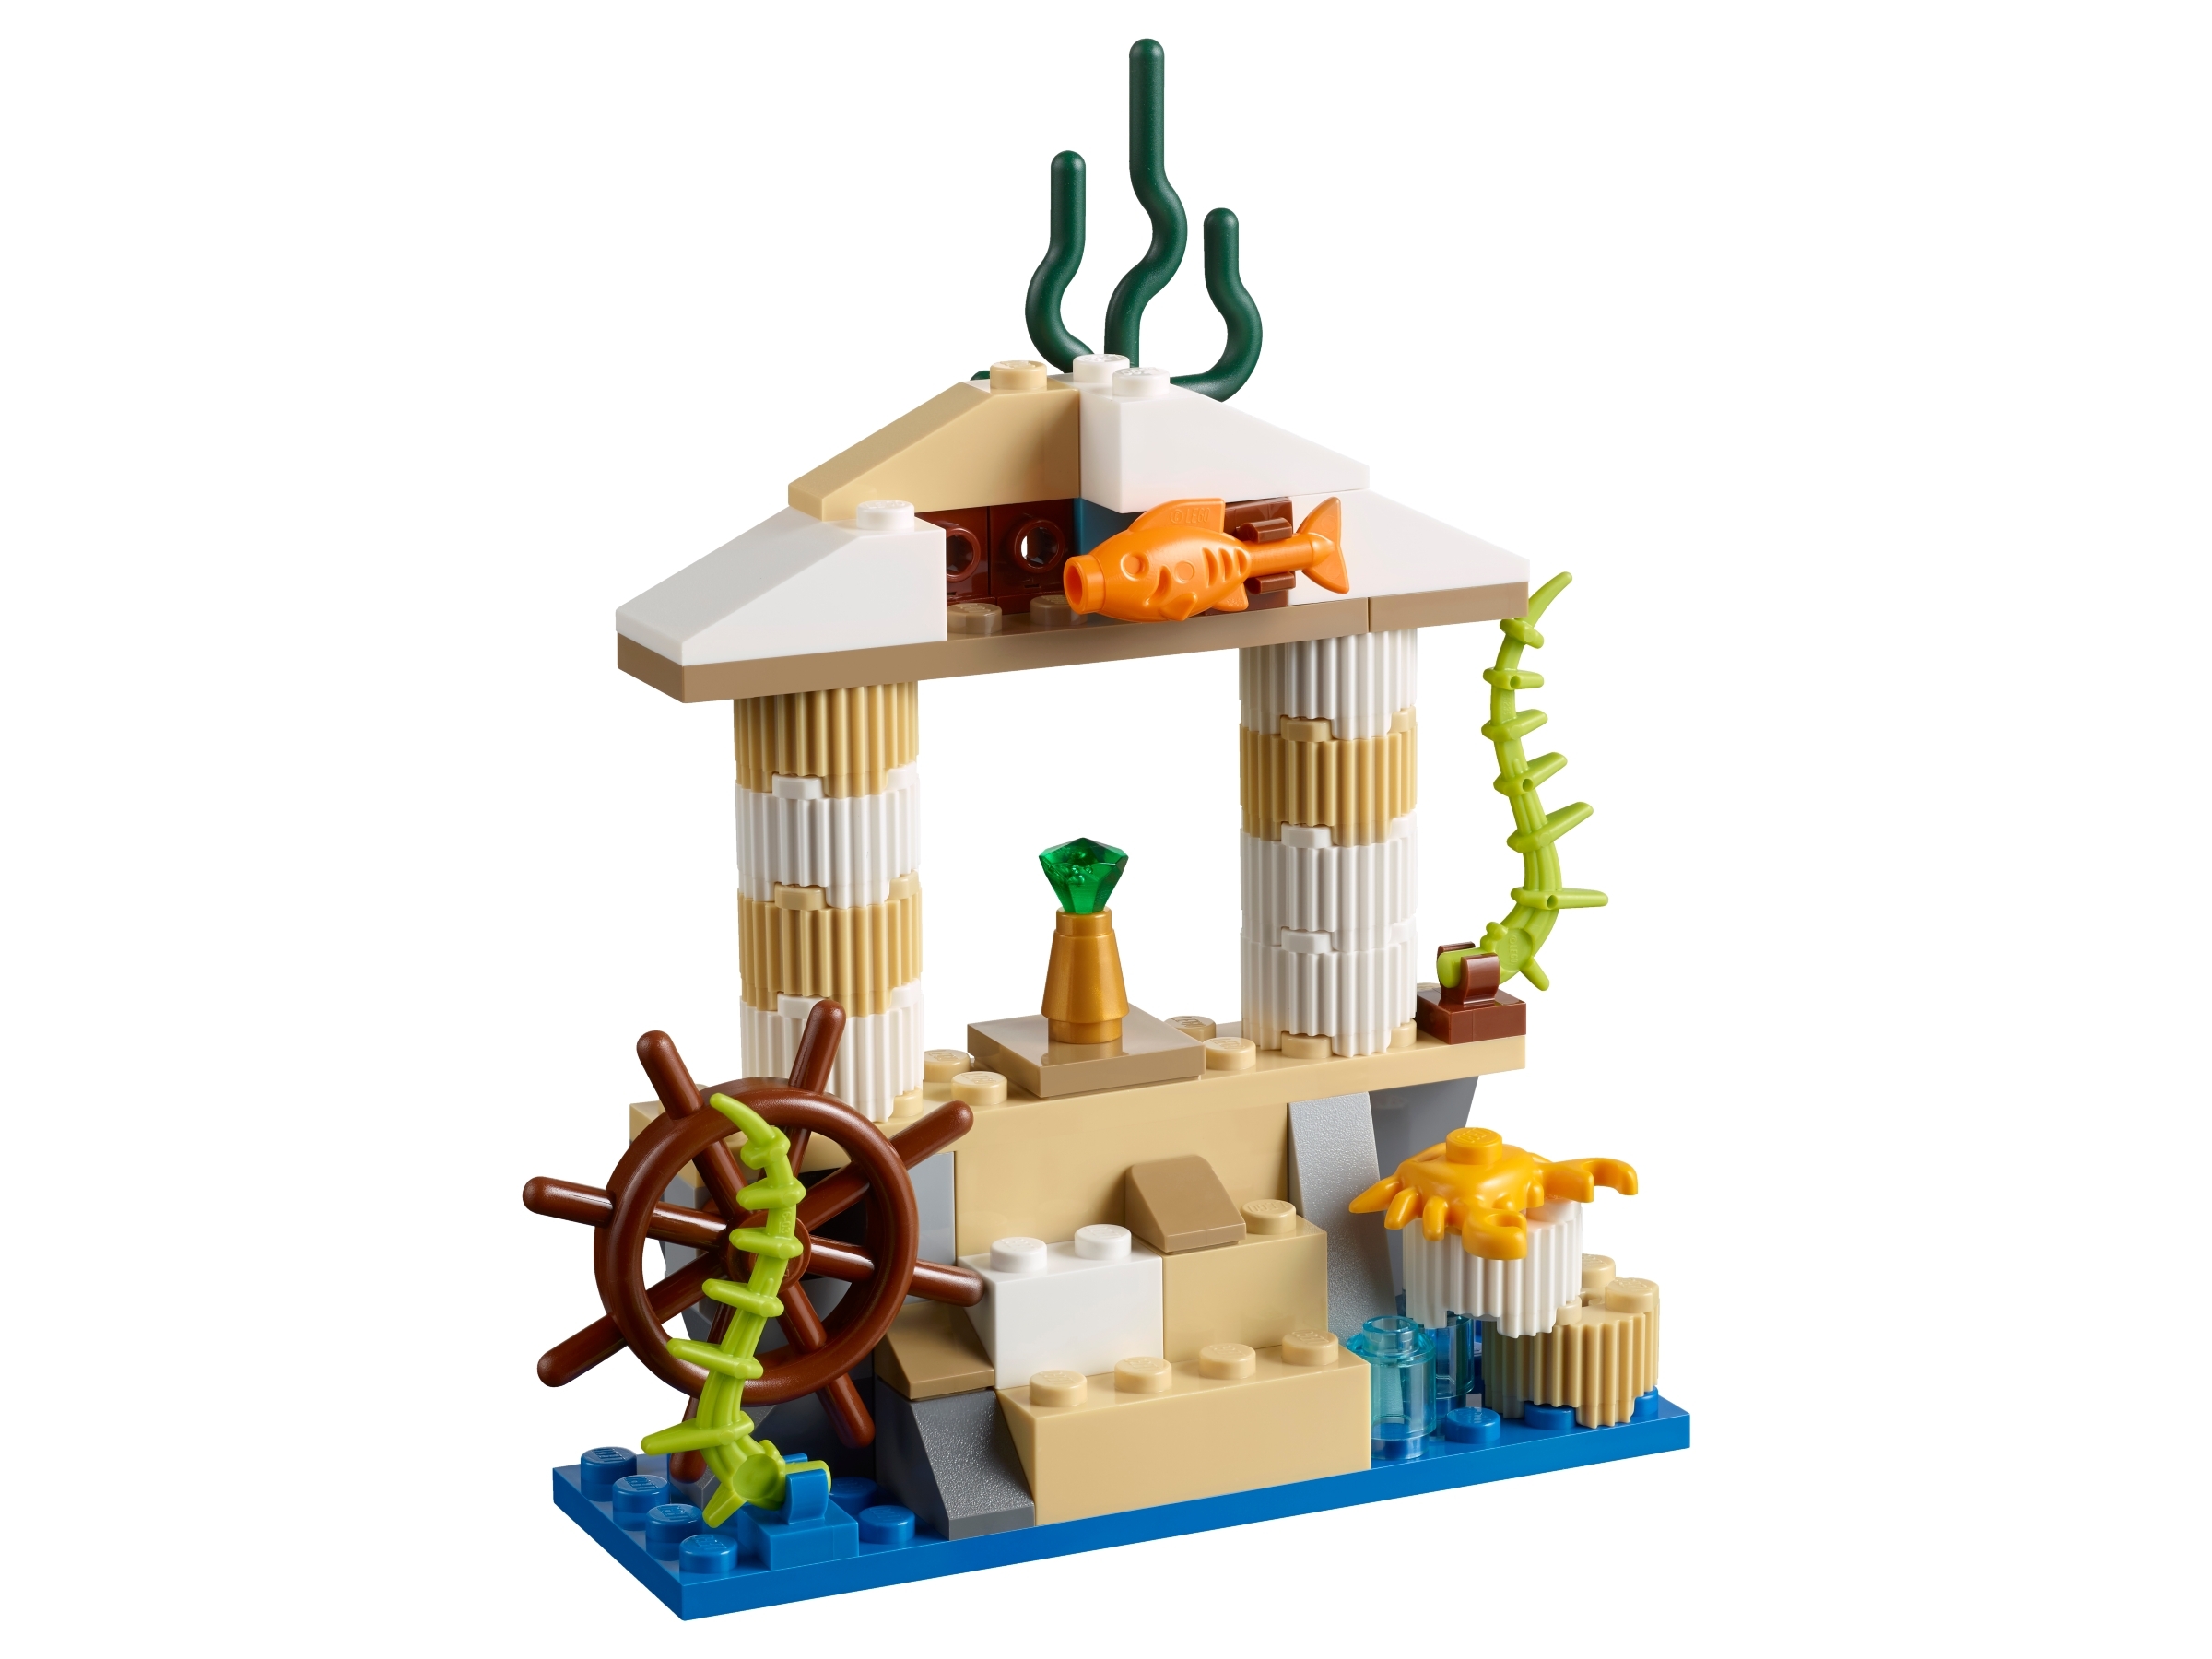 World Fun 10403 | Classic Buy online at the Official LEGO® Shop US